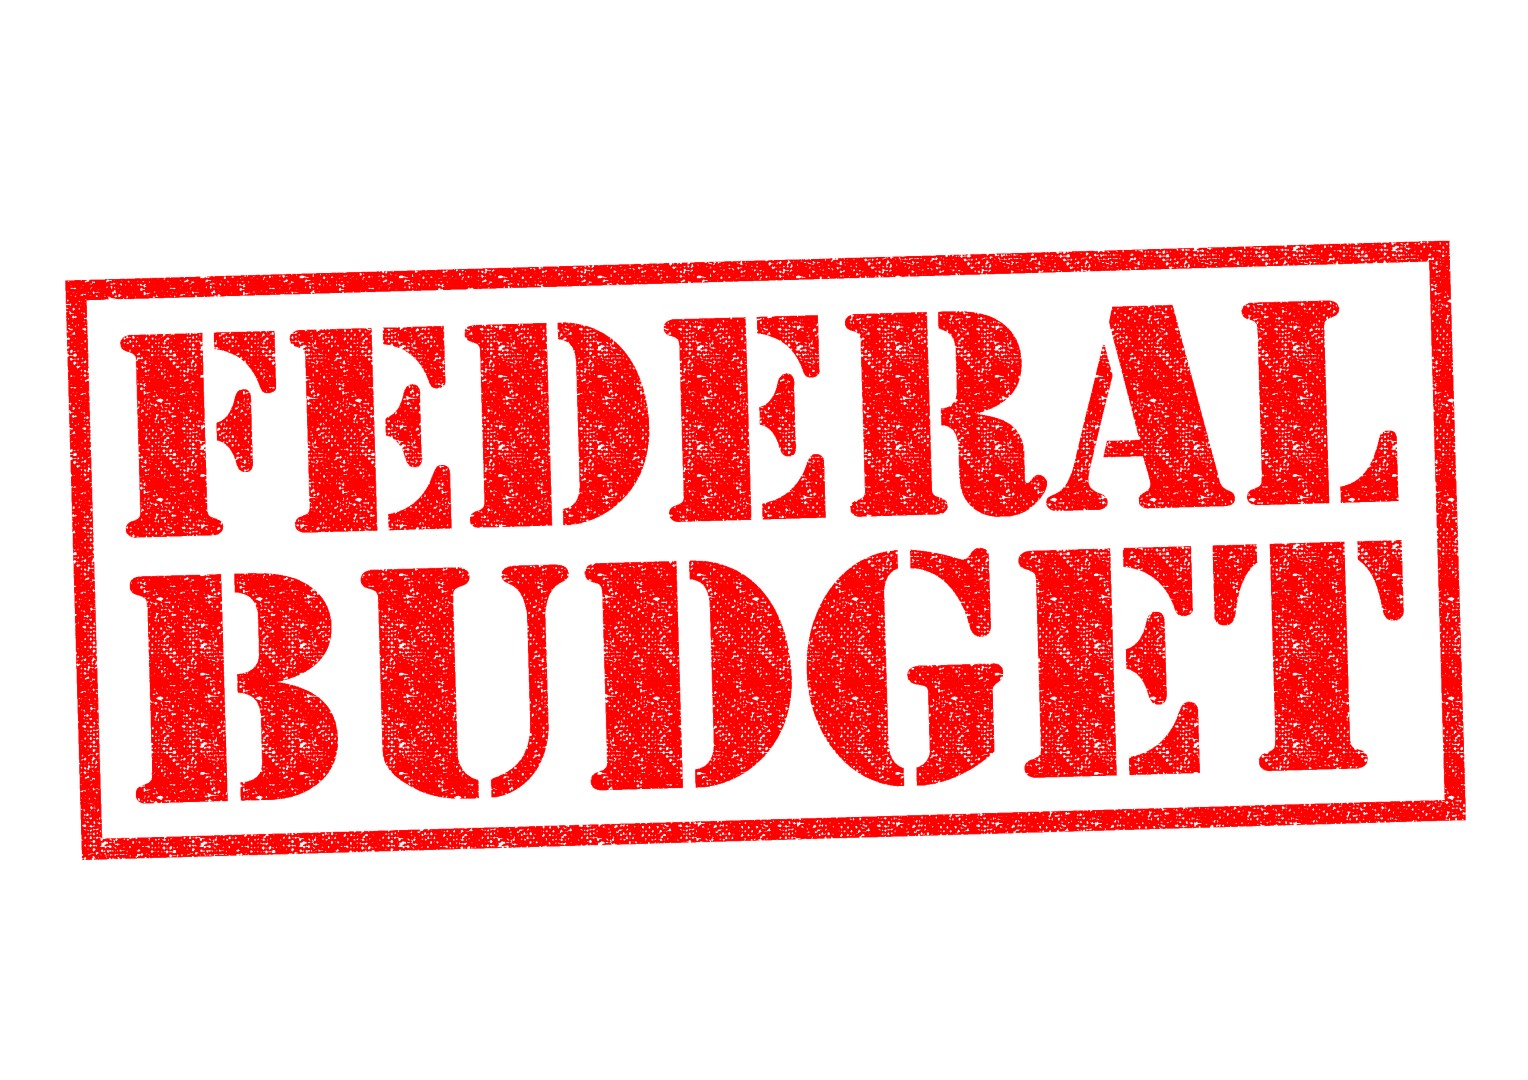 FEDERAL BUDGET red Rubber Stamp over a white background.